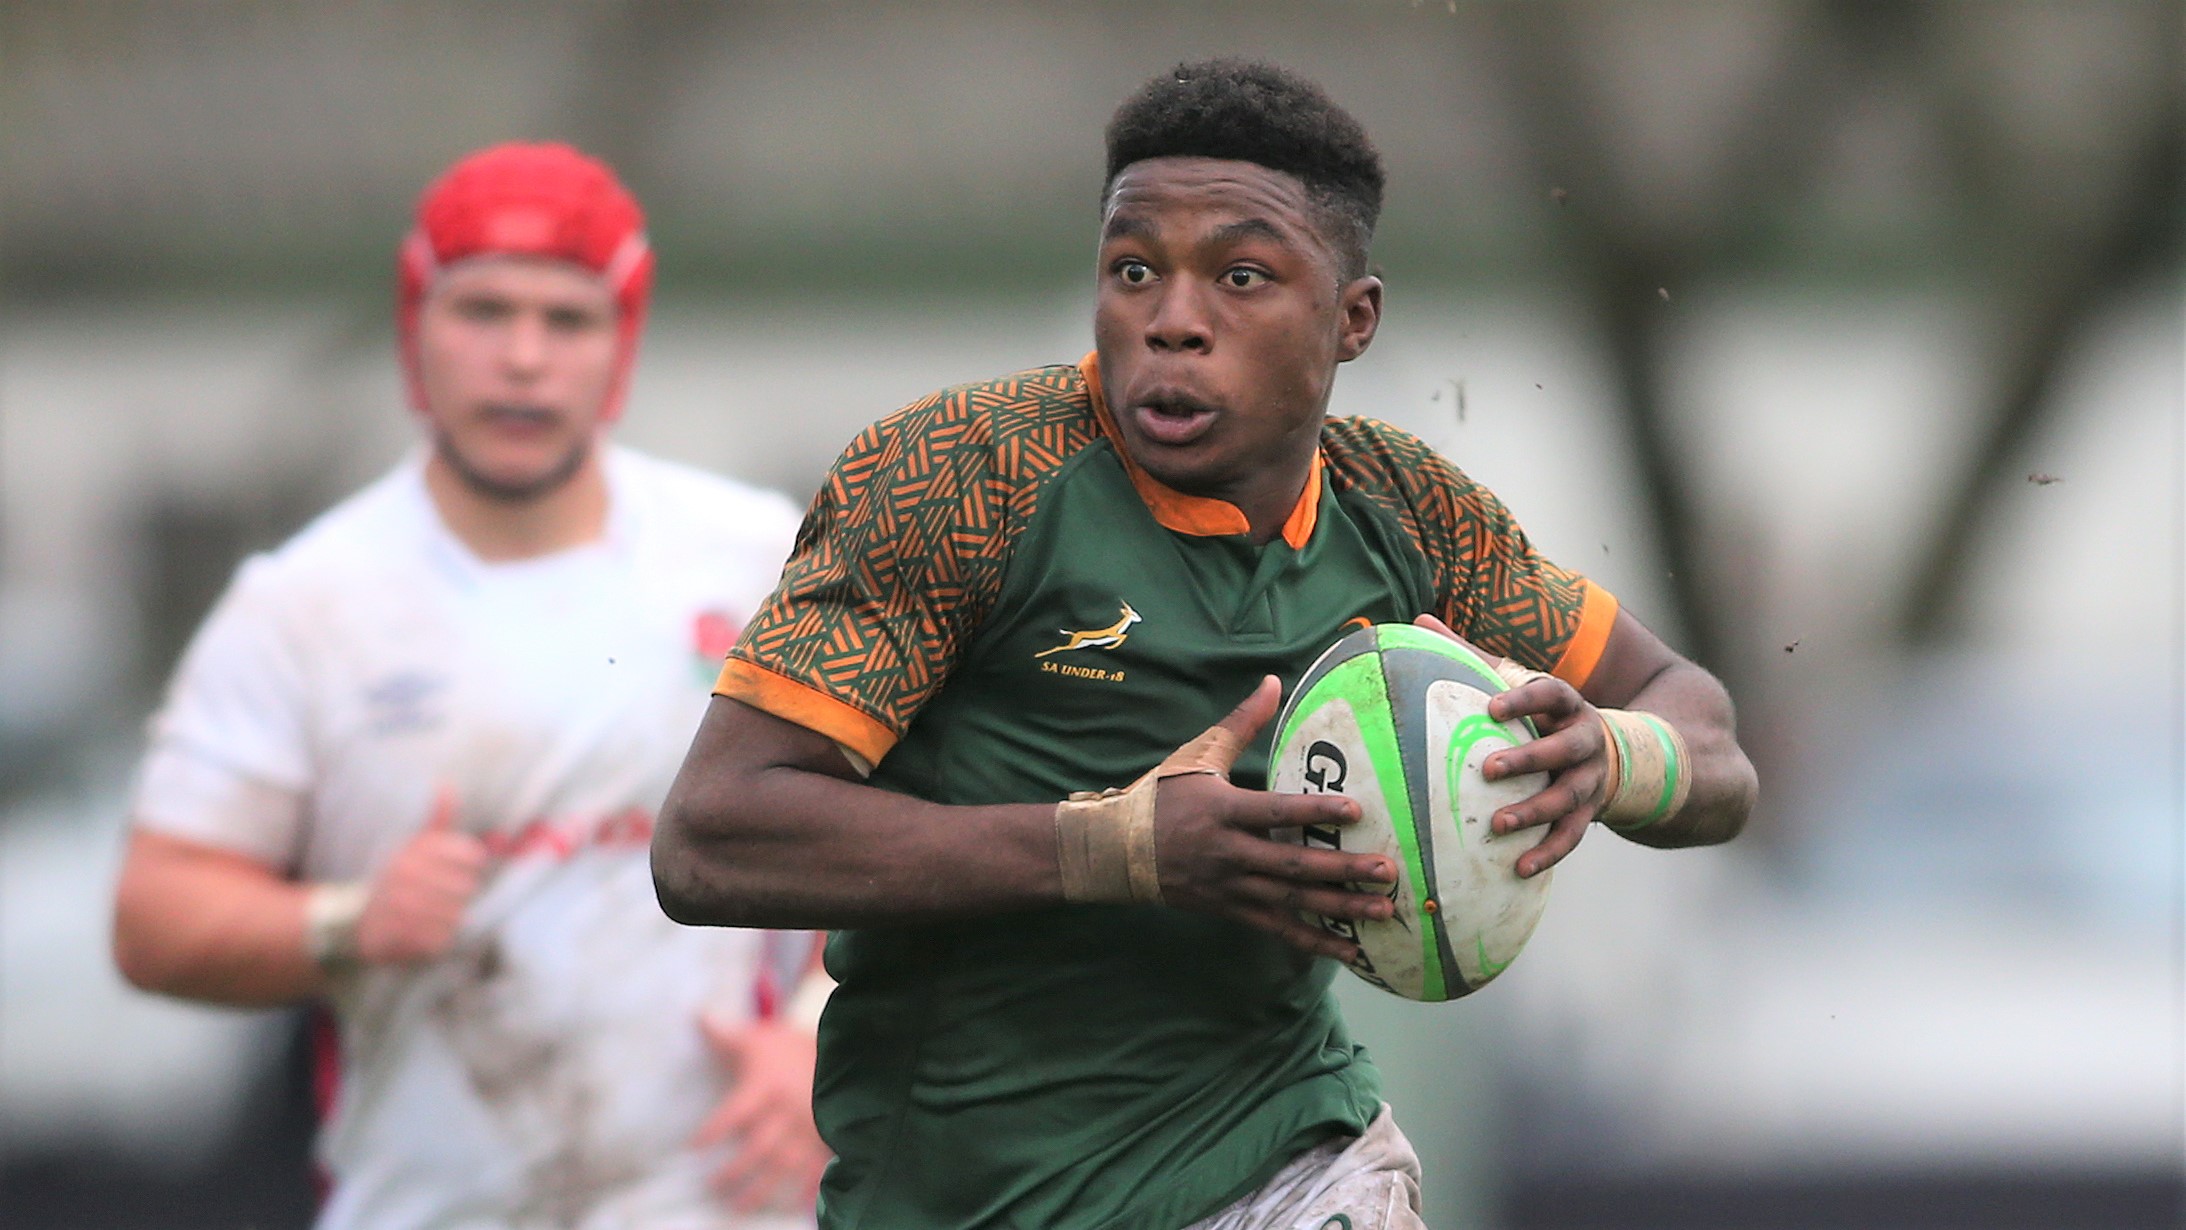 Sibabalwe Mahashe of South Africa U18 on the attack during the 2022 U18 International Series match between South Africa U18 and England U18 held at Paarl Gimnasium in Paarl on 19 August 2022 ©Shaun Roy/BackpagePix